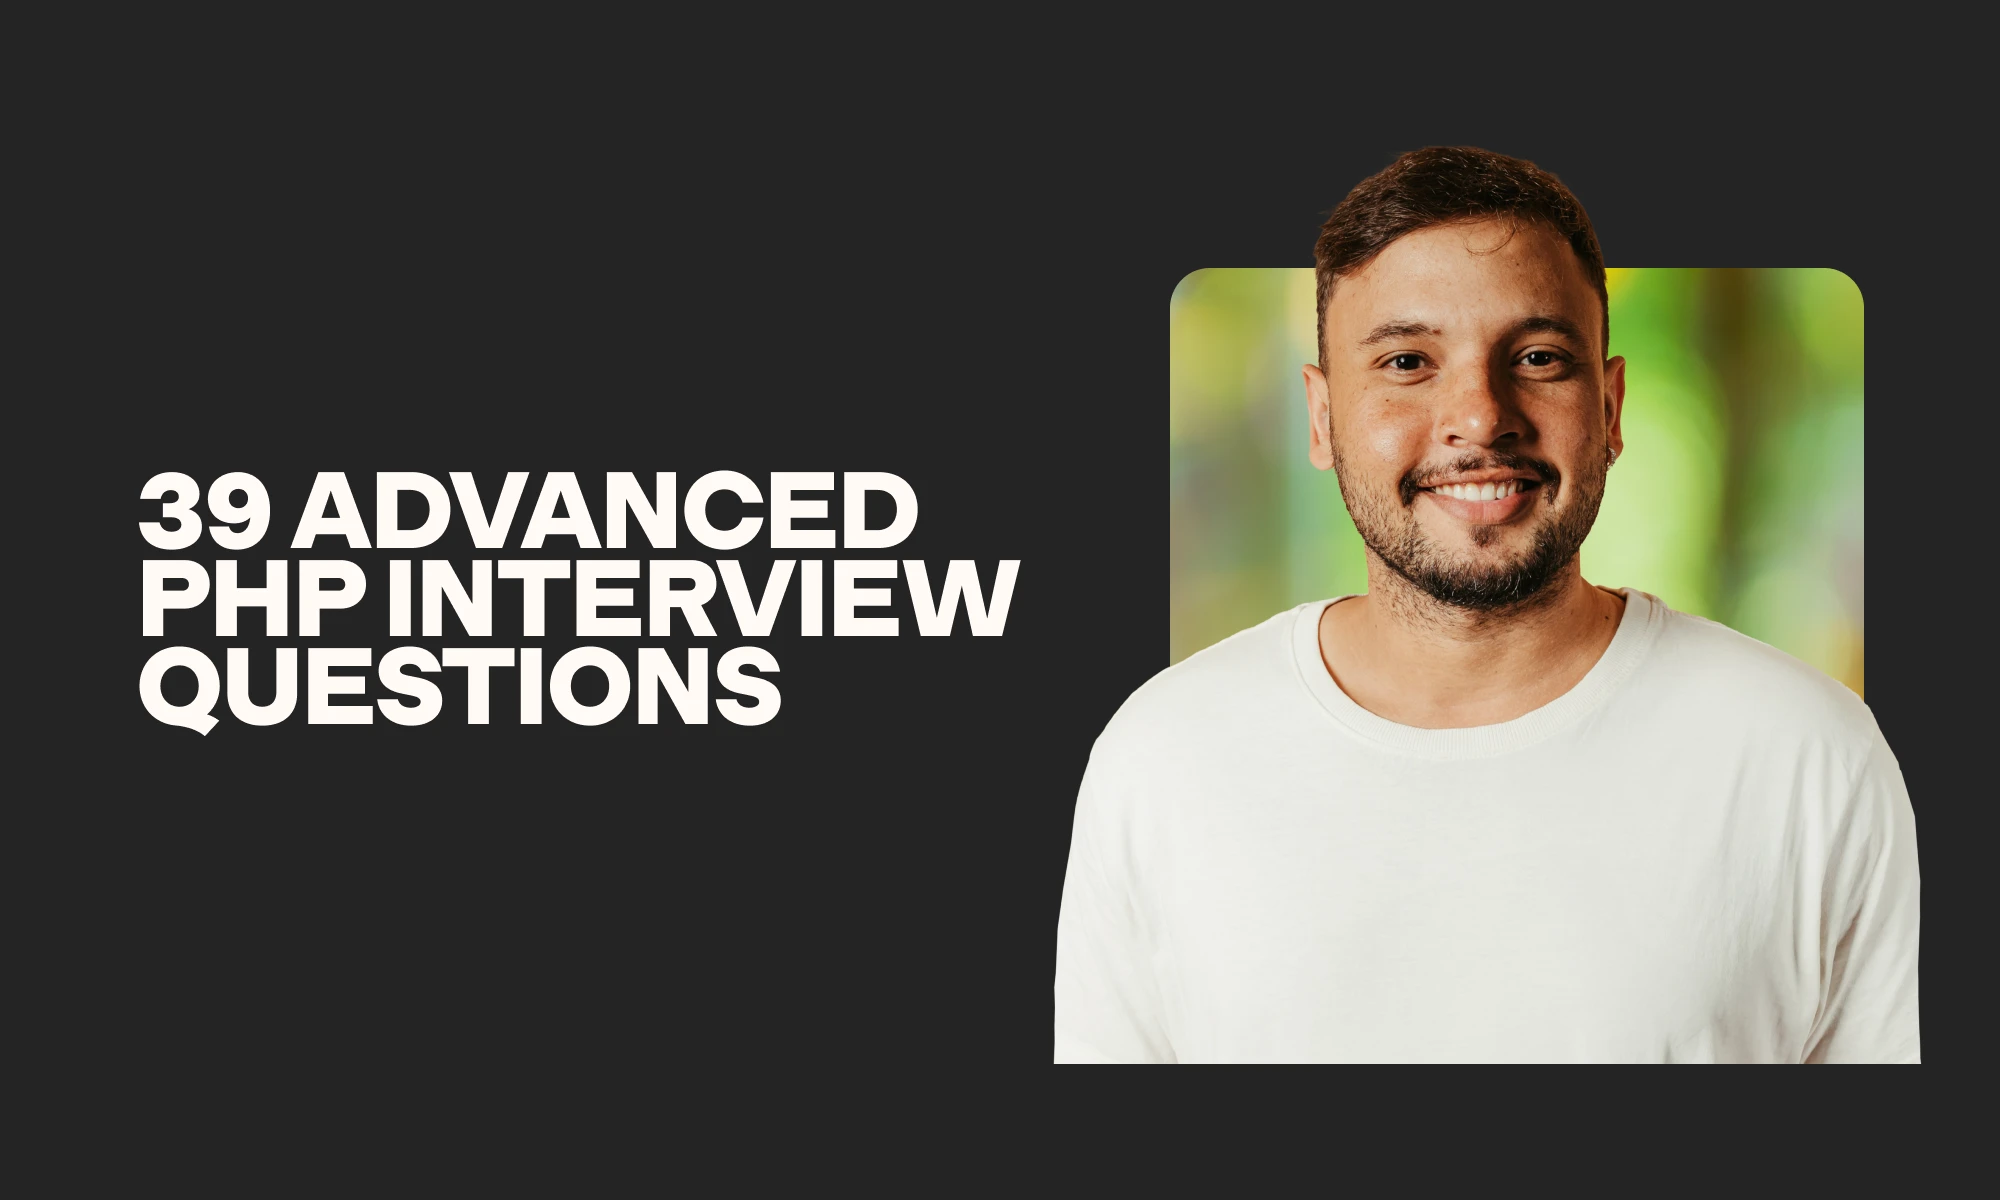 image showing advanced PHP interview questions